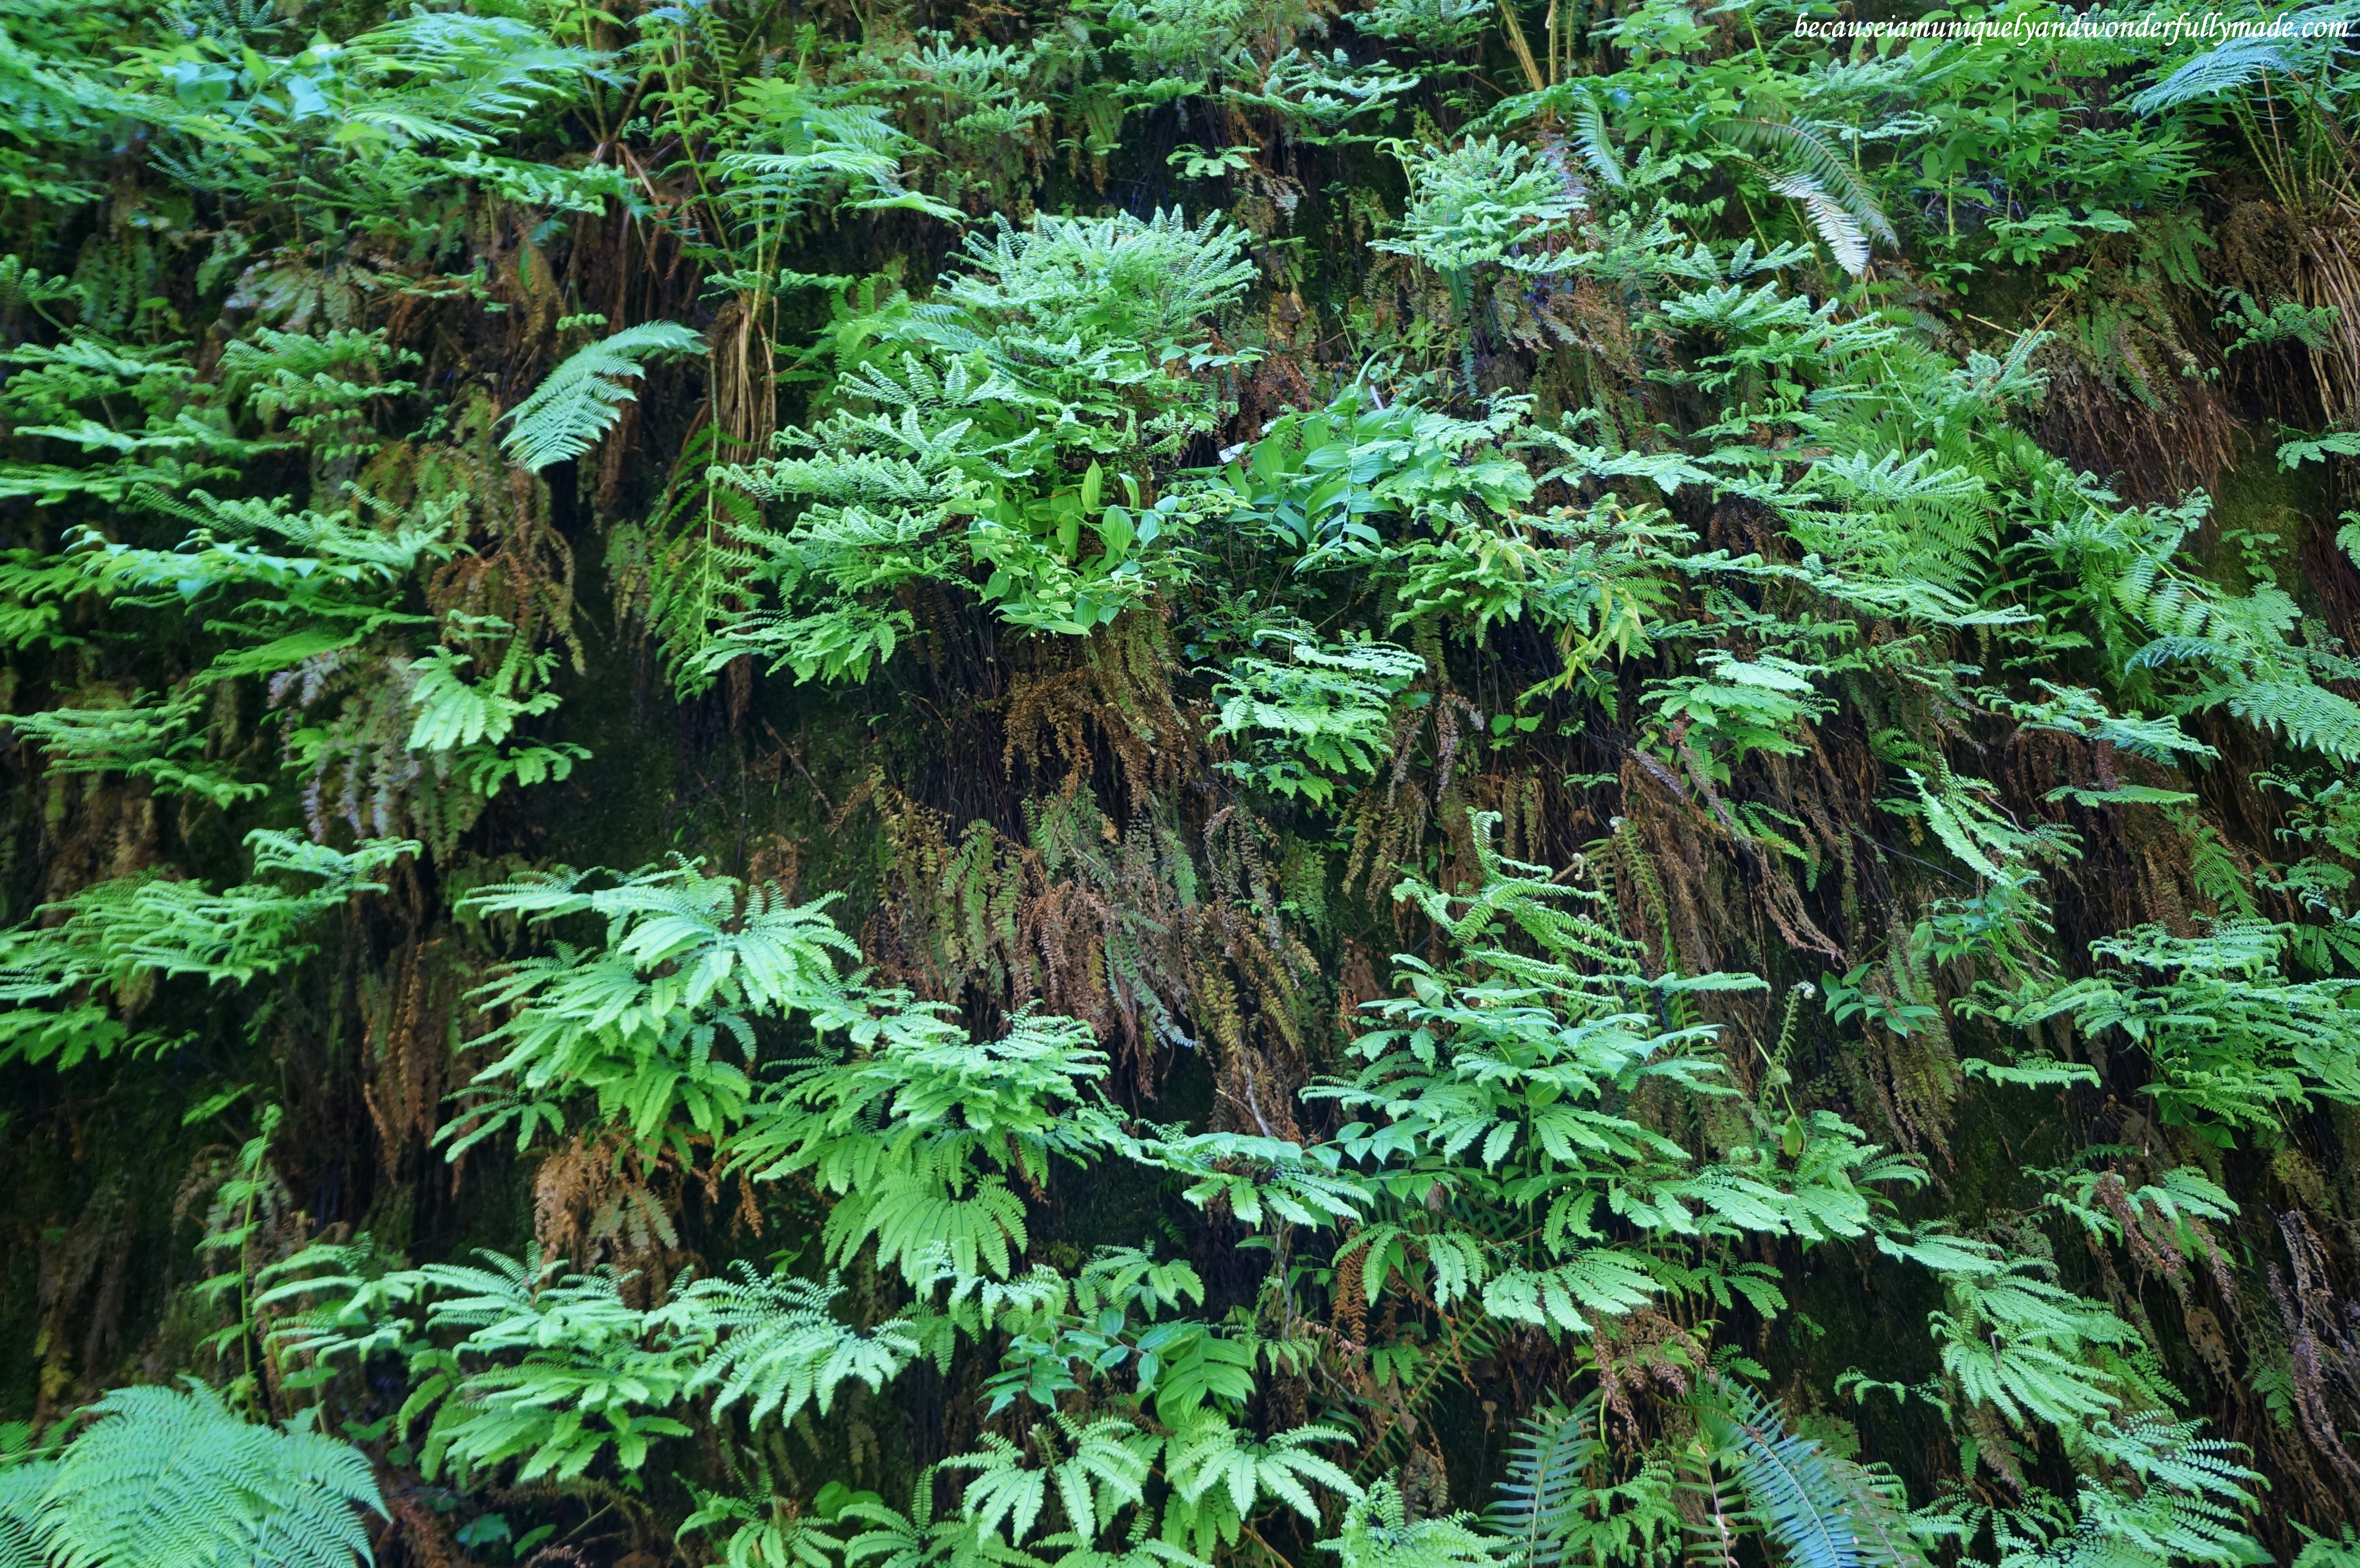 The walls of Fern Canyon is carpeted with ferns and moss that drips. Some of these fern species can be traced to be over 300 million years old. 